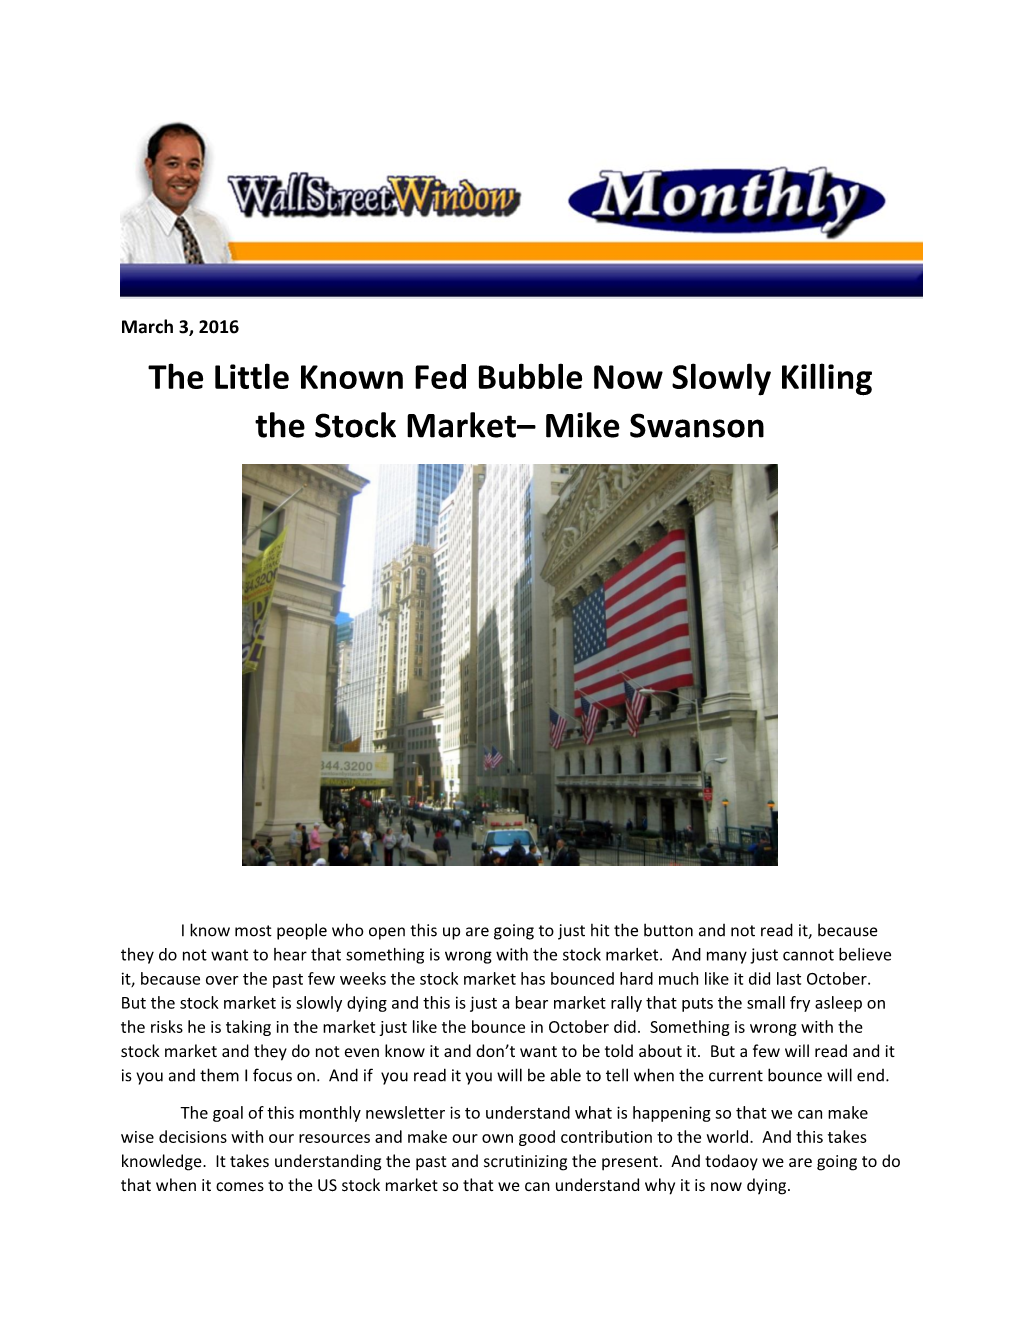 The Little Known Fed Bubble Now Slowly Killing the Stock Market– Mike Swanson